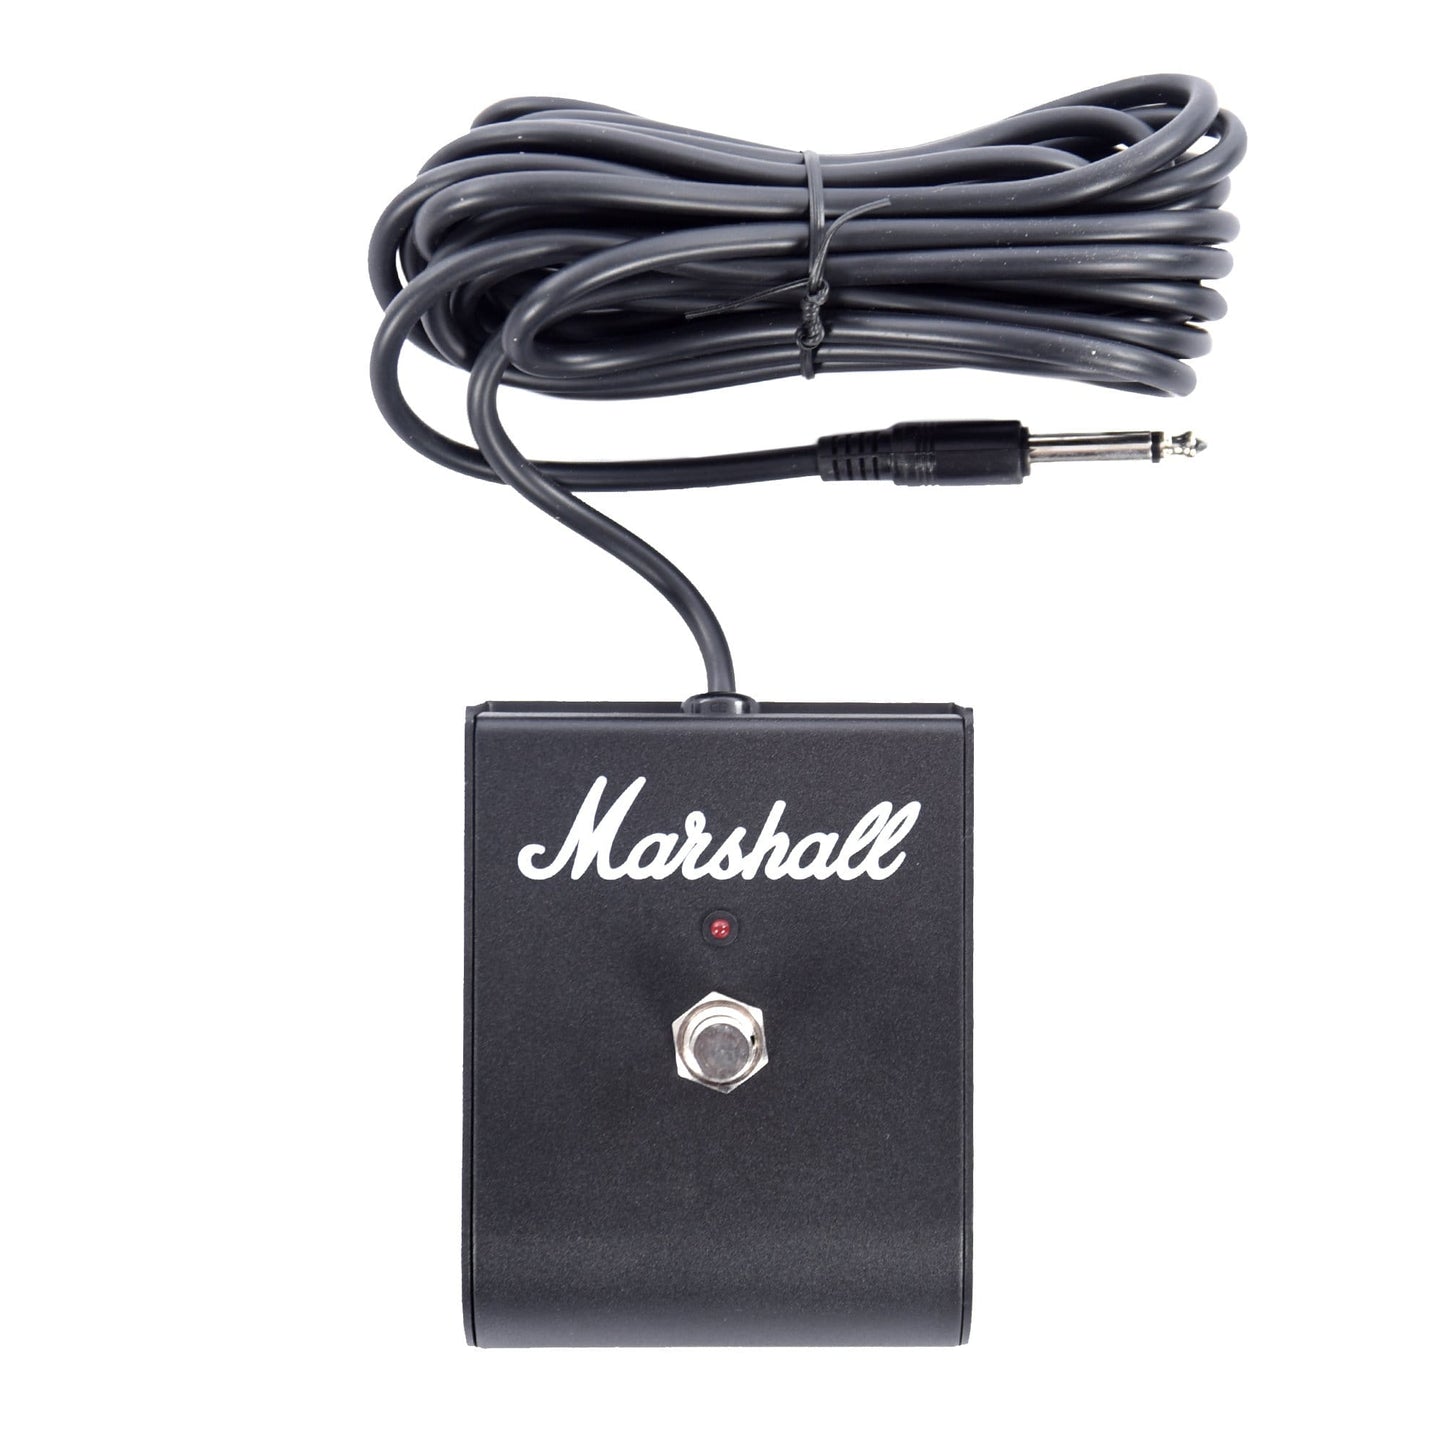 Marshall JCM2000 Footswitch Effects and Pedals / Controllers, Volume and Expression